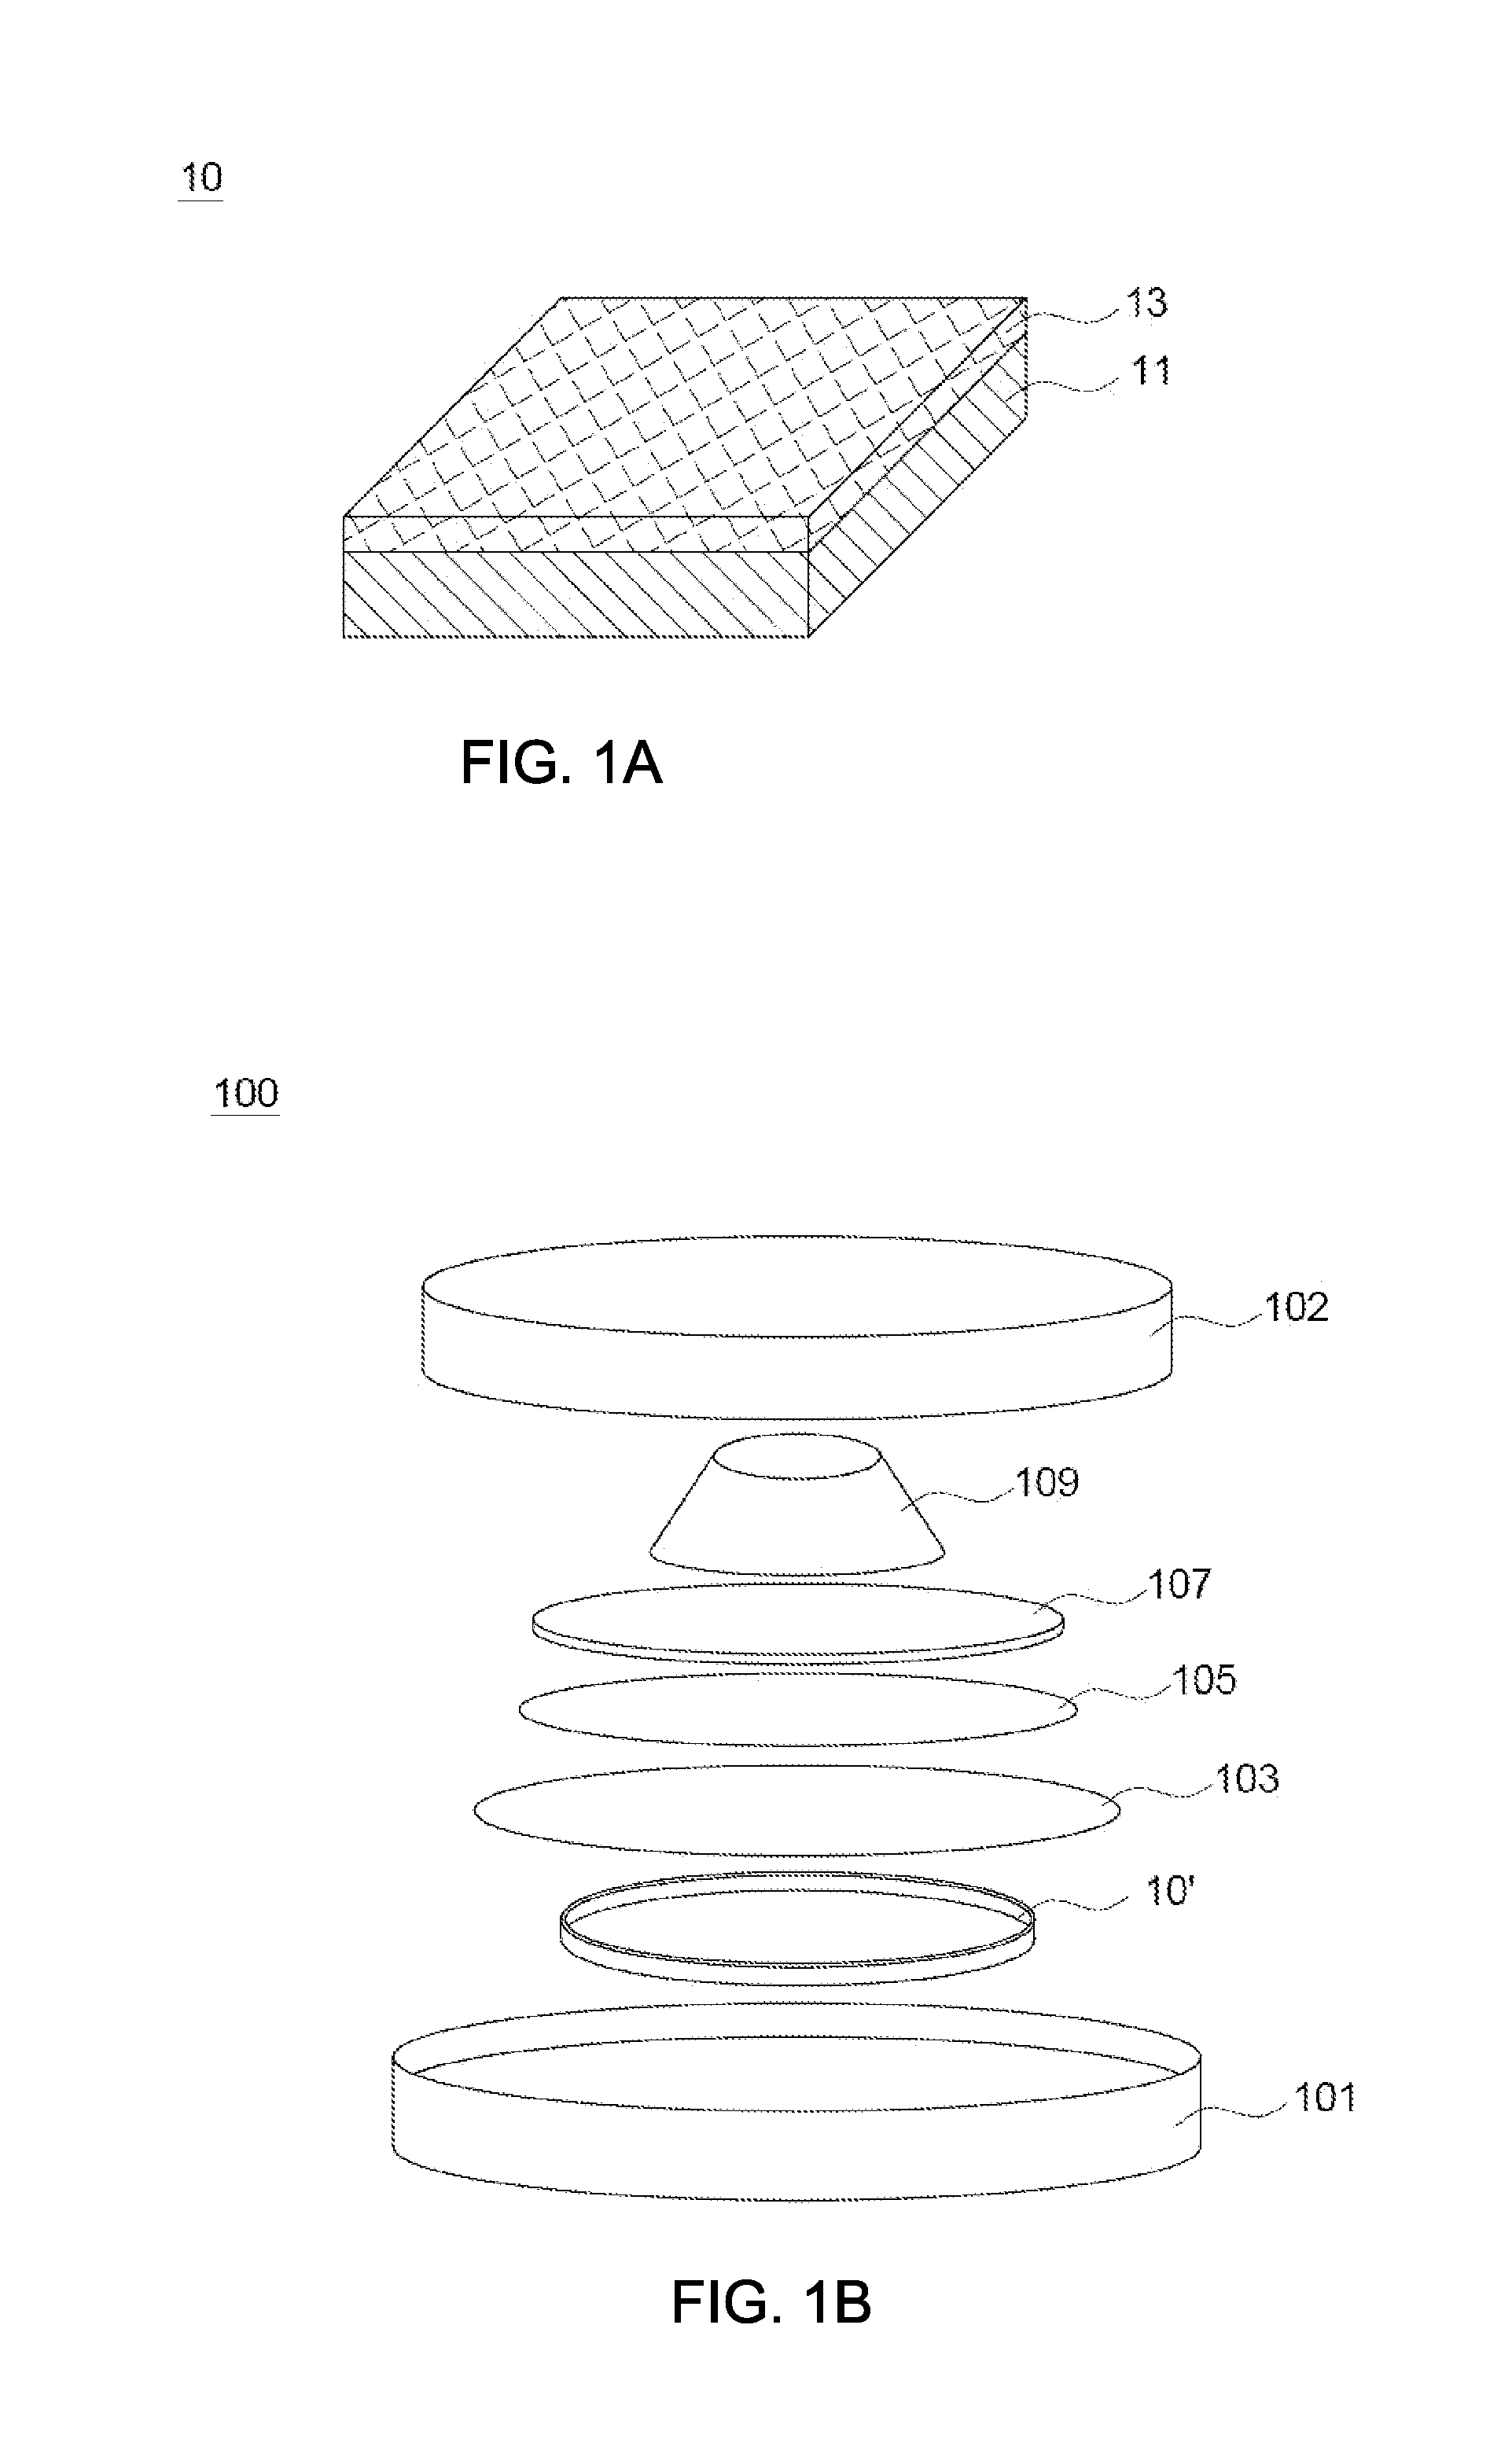 Lithium-ion battery and lithium-ion battery electrode structure with dopants